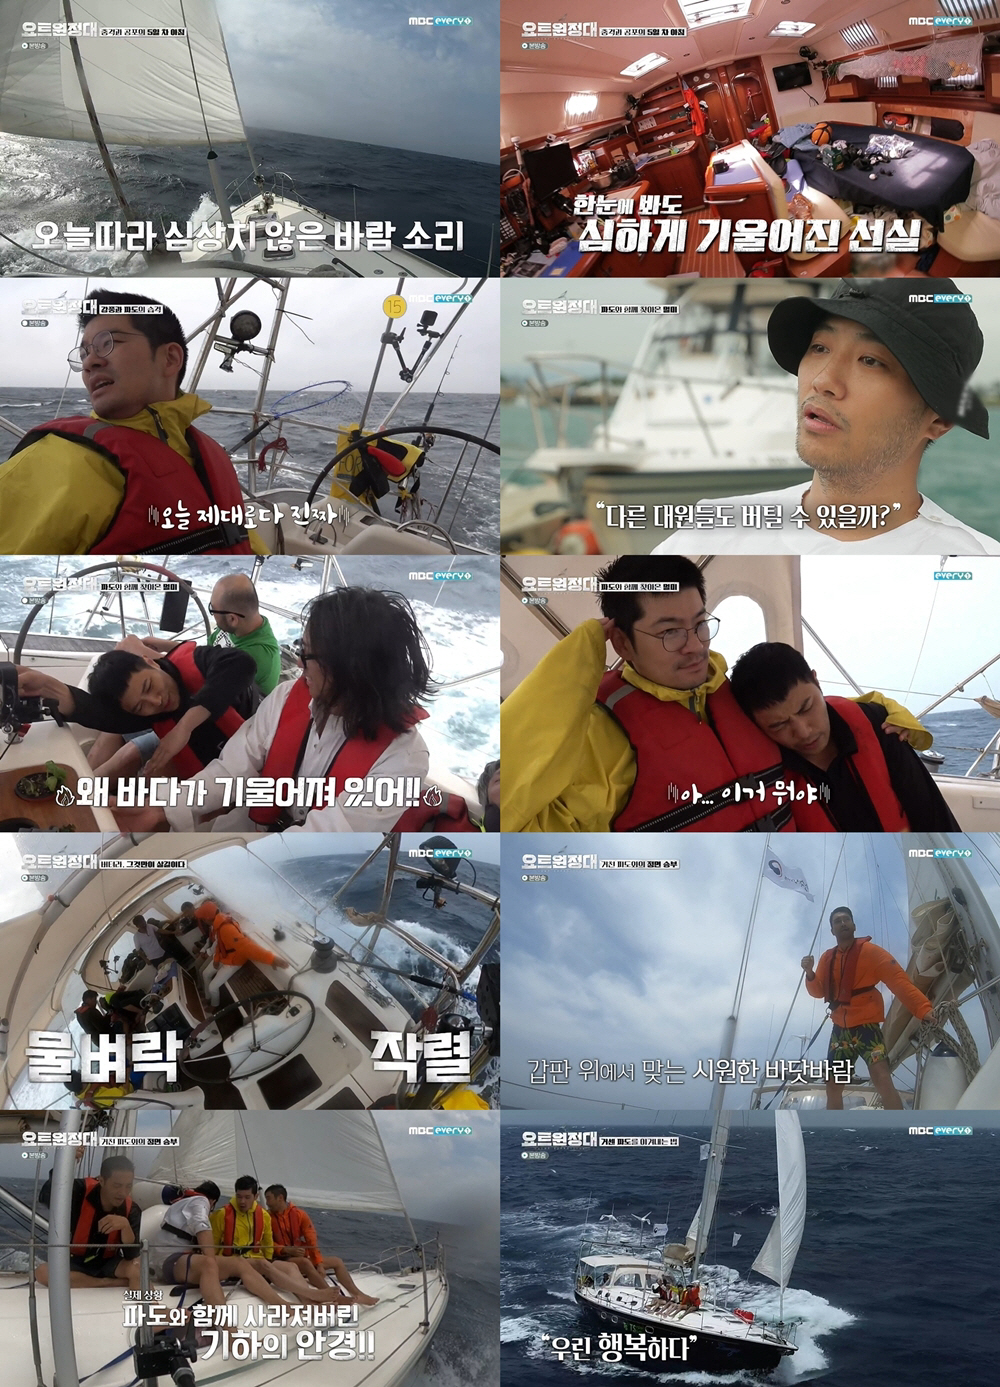 Finally, a rough Sea appeared in front of the yacht expedition.In the 5th MBC Everlon Yot Expedition broadcast on September 14, Jin Goo, Choi Siwon, Chang Kiha and Song Ho Jun were drawn to meet the 5th day of the voyage of shock and fear.If the Sea they had met so far had been beautiful and peaceful, the Sea facing the Yacht Expedition was different on this day, engulfing the Yacht Expedition in a rough and threatening manner that transcended imagination.The sailing 4th Yot Expedition crews were nervous about Captain Kim Seung-jins words that strong winds would come from tonight, and finally it was the fifth morning that they were worried about.The yacht shook without hesitation in the house-sized The Waves, and the bed mattress slipped.The crews condition was also the worst in the strong The Waves, which began in the morning, with Chang Kiha not being able to say its real today.When I woke up, The Waves was waving like crazy, and under these circumstances I slept? Did you dream?I thought about this, he said, drawing attention to the appearance of Chang Kiha, who recalled the time.Even Jin Goo, who showed his usual passion for the man, showed a hard time getting seasick on this day.Jin Goo was seen struggling to beat seasickness, shouting Please live and Why did you bring me? for Sea.Jin Goo, who envied Chang Kiha, who does not get sick, called it the miracle, eventually rested on Chang Kihas shoulder and took a break.All they could do was wait in front of the power of the dreadful nature, and all of them were exhausted by seasickness, and Choi Siwon was encouraged.Lets try to win, he says, and head spleenly over the deck: Enjoy this situation if you cant avoid The Waves, a conclusion by Choi Siwon.Along the youngest Choi Siwon, Jin Goo, Chang Kiha and Song Ho-joon also headed on deck, and the Yot Expedition crew cheered and enjoyed the open sea.Choi Siwon said, How many times will you experience this experience in your life while living? And made you guess that you realized a lot through it.The crew sat side by side on deck and weathered the rough Sea together.In the meantime, a large The Waves hit them, and Chang Kihas glasses were swept away by The Waves.Chang Kiha thanked the members who tried to find his glasses without giving up in a confused situation, and their sticky teamwork caused a warm smile.The appearance of the Yot Expedition crew, who enjoyed the charm of the real Sea, offered the charm of adventures not seen in any of the entertainments; Jin Goo said, Four meters high (?)I am sick of meeting The Waves of the degree , Song Ho-joon is playing with The Waves, Chang Kiha said, I have glasses flying to The Waves, Choi Siwon said, I have died on the 5th day of the voyage, I am going to die again. Finally, I am happy.However, in the 6th preview video, The Waves, which is getting bigger in front of them, was shown.The MBC Everlon Yot Expedition is broadcast every Monday at 8:30 pm, and the crew members who are in conflict and the crisis of the Pacific voyage are predicted and tense.